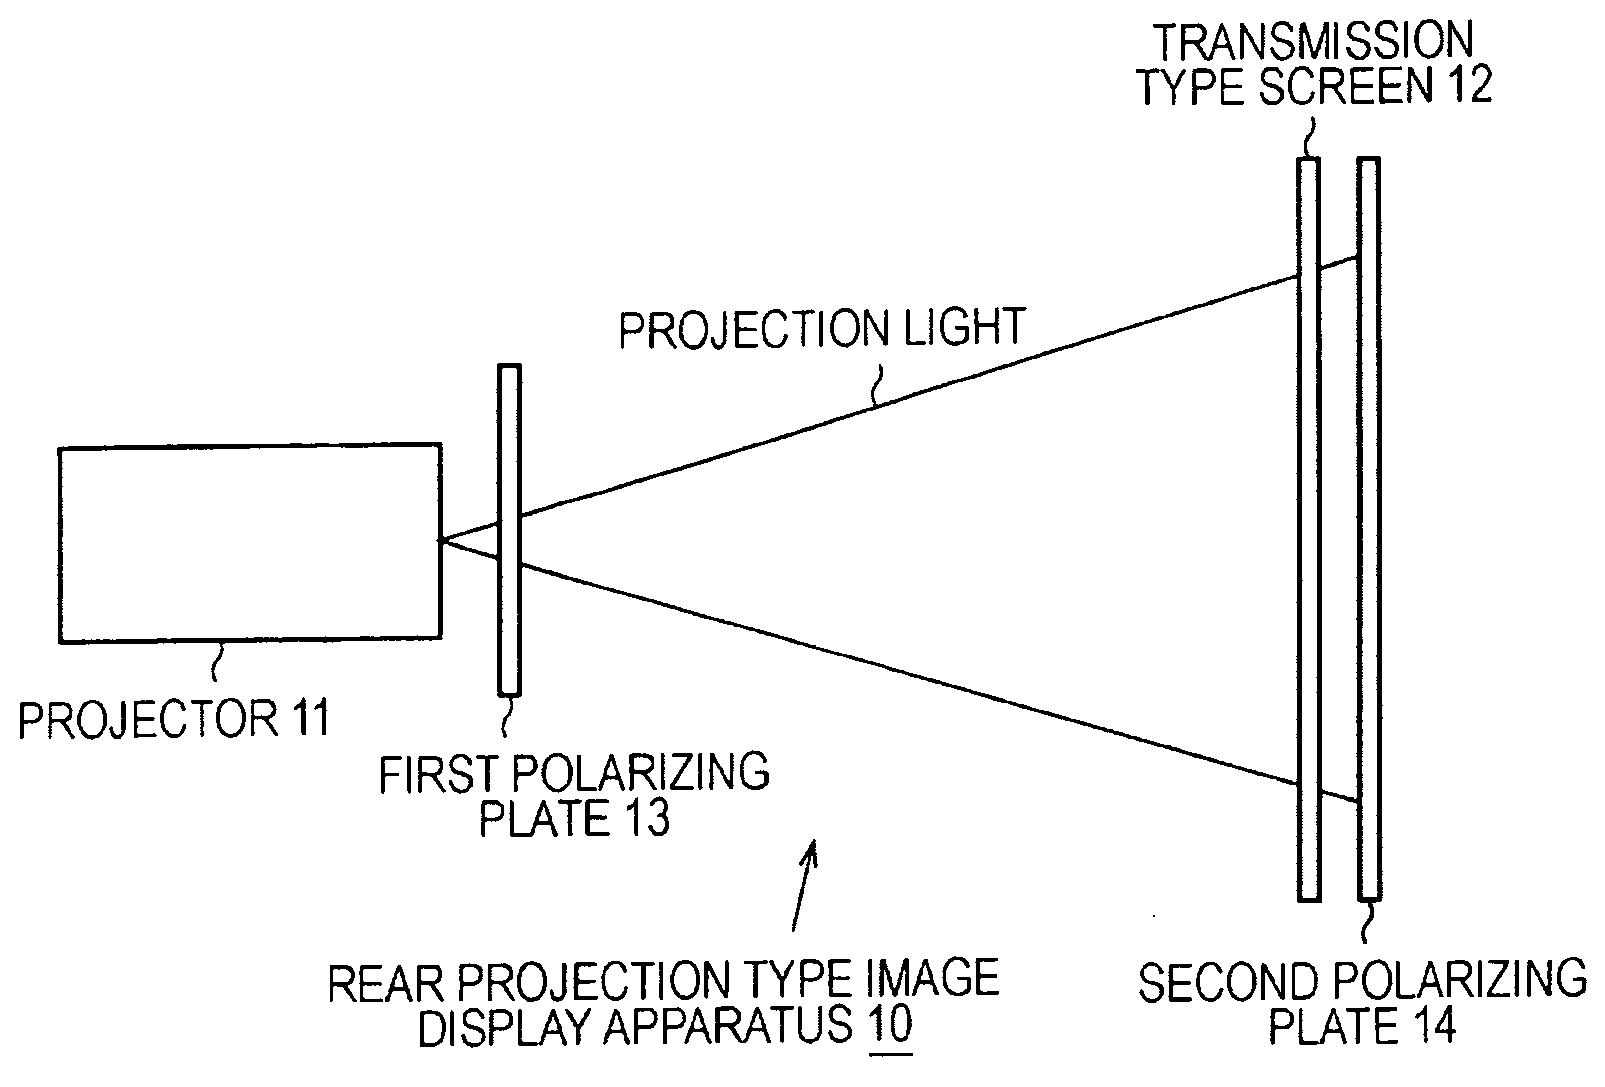 Rear surface projection type image display device